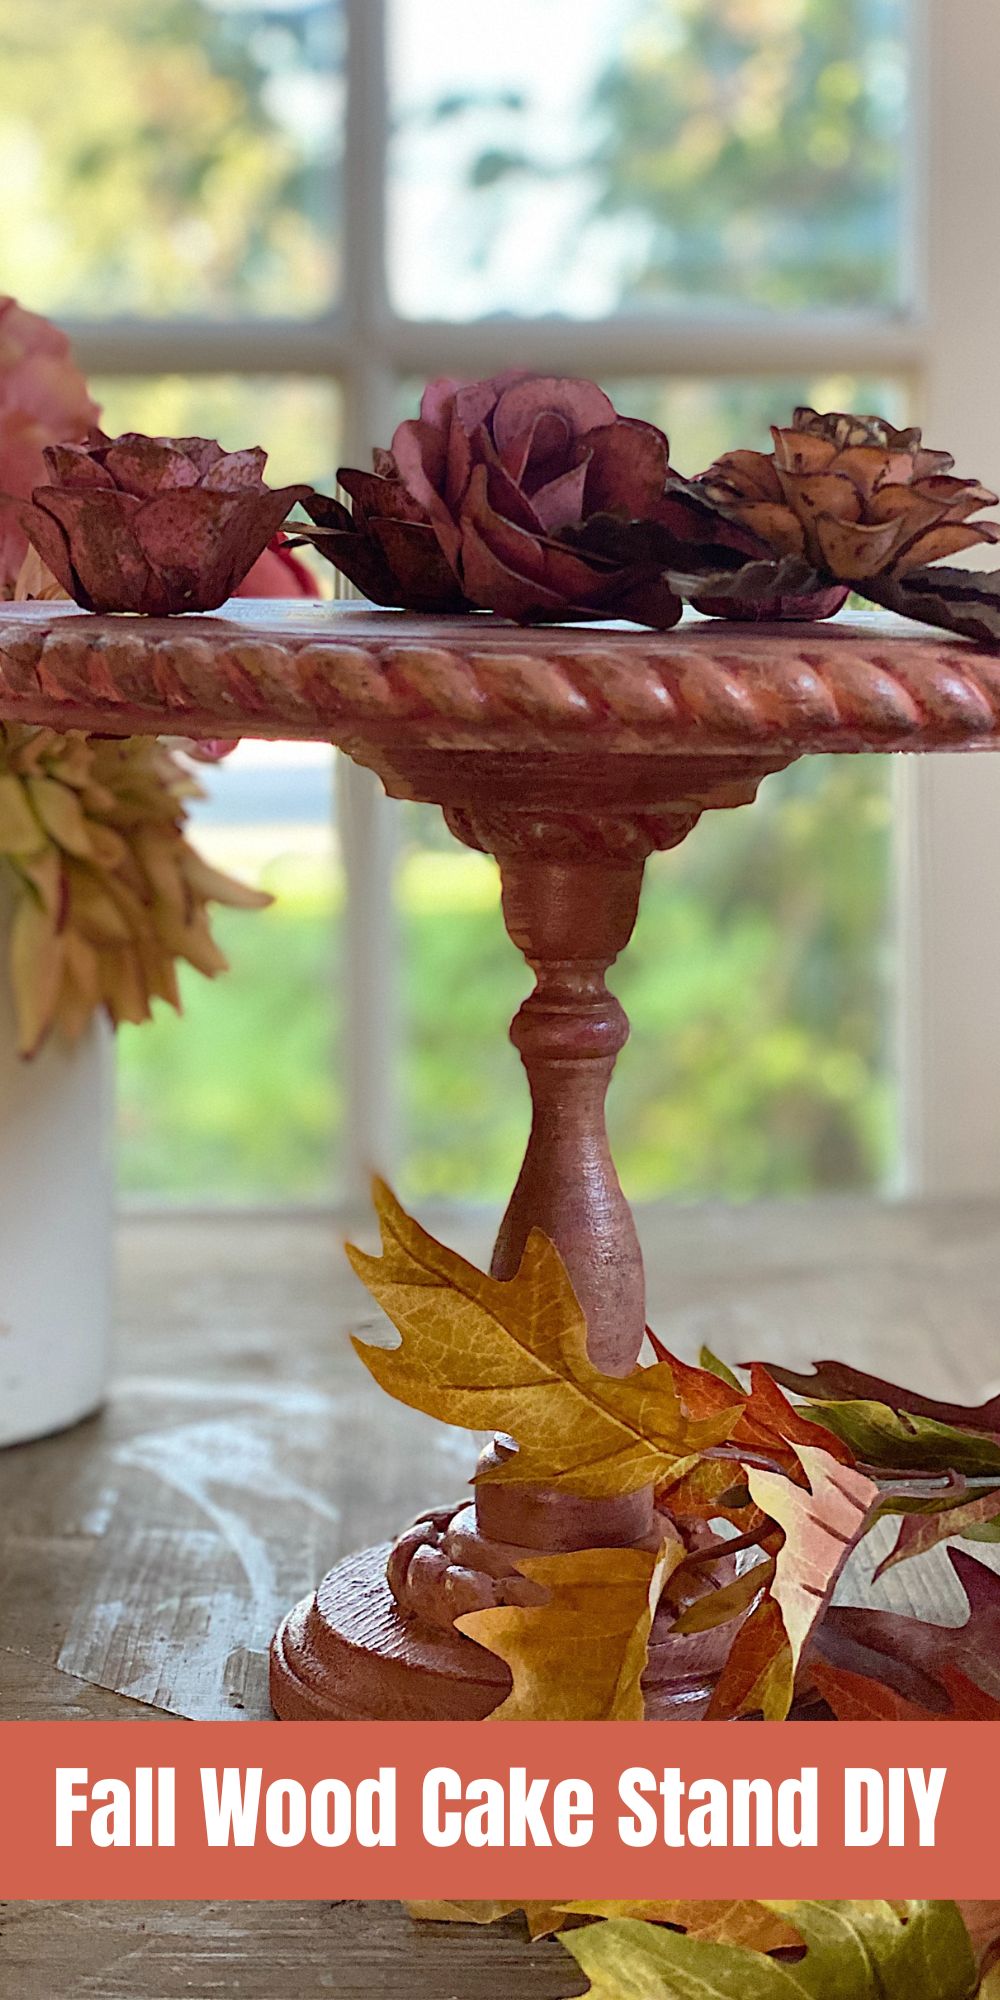 I have been busy making crafts for fall and I love my latest DIY - a fall wood cake stand. I chose to use fall colors (instead of white) and am so happy I did!